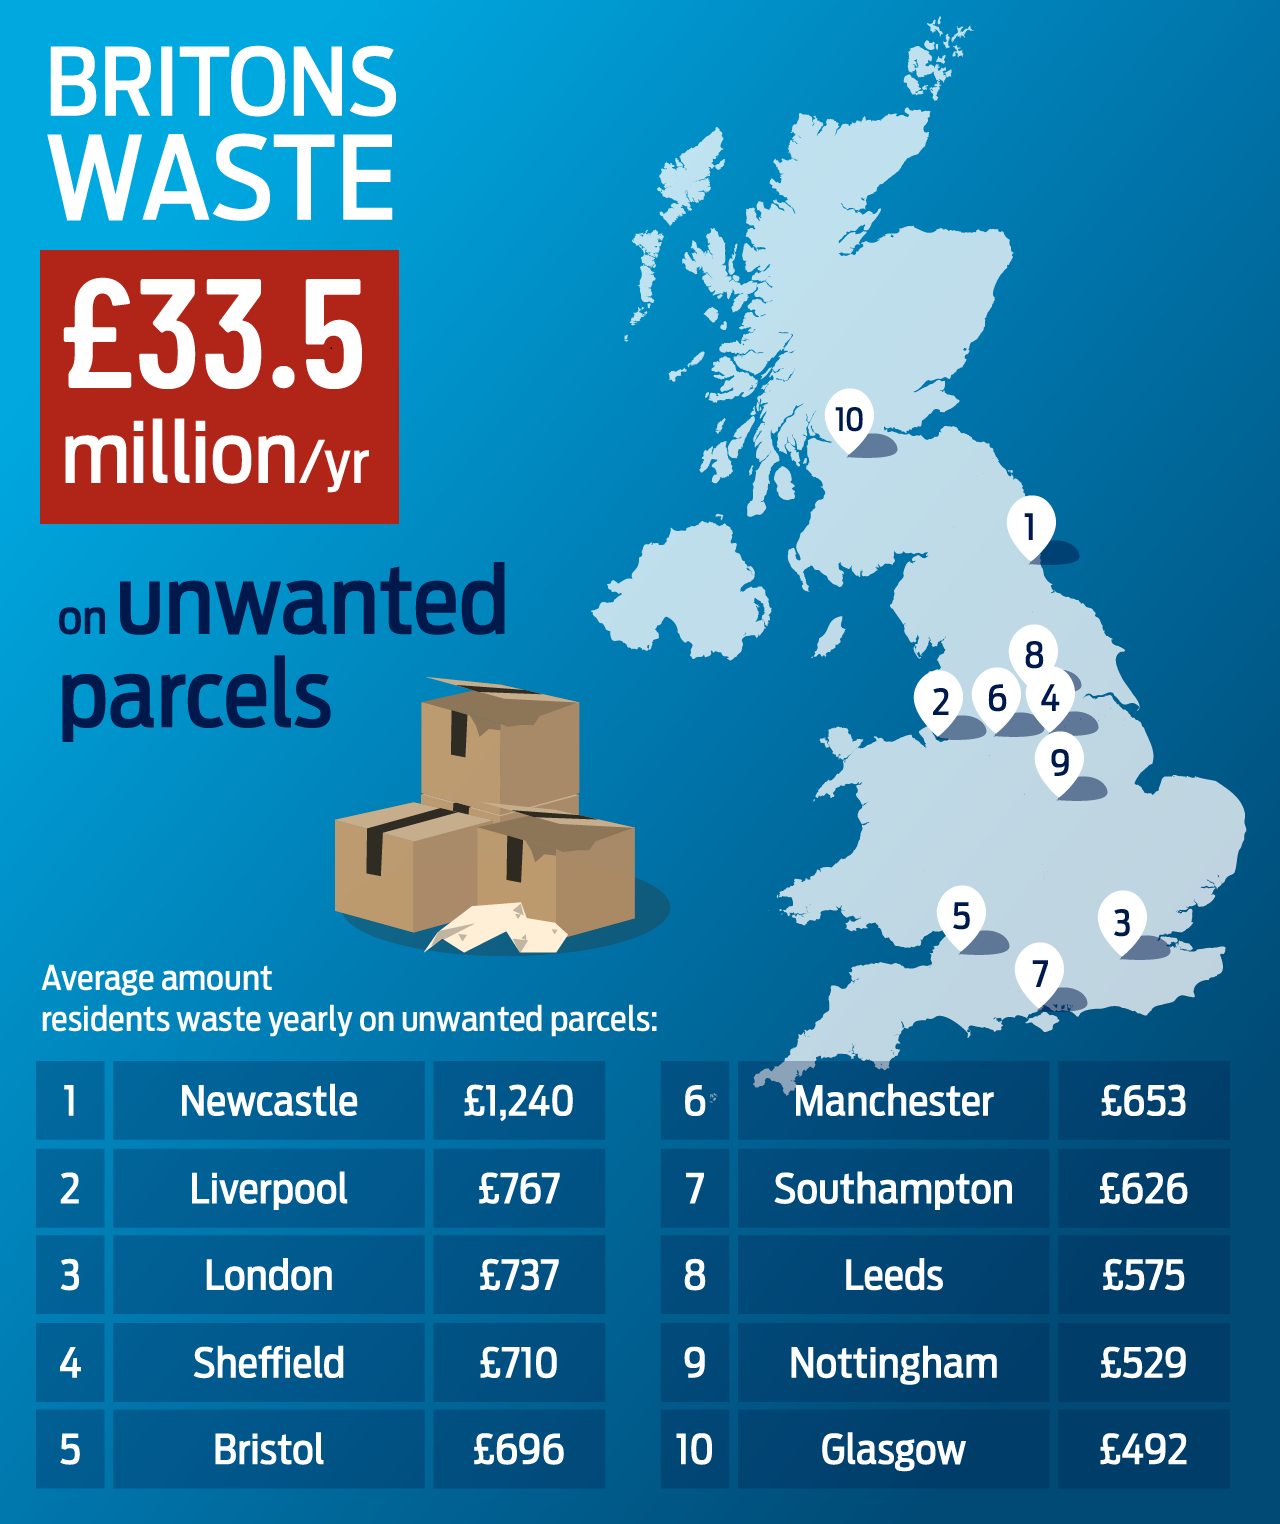 Table: List of UK locations ordered by how much money they waste yearly on unwanted parcels